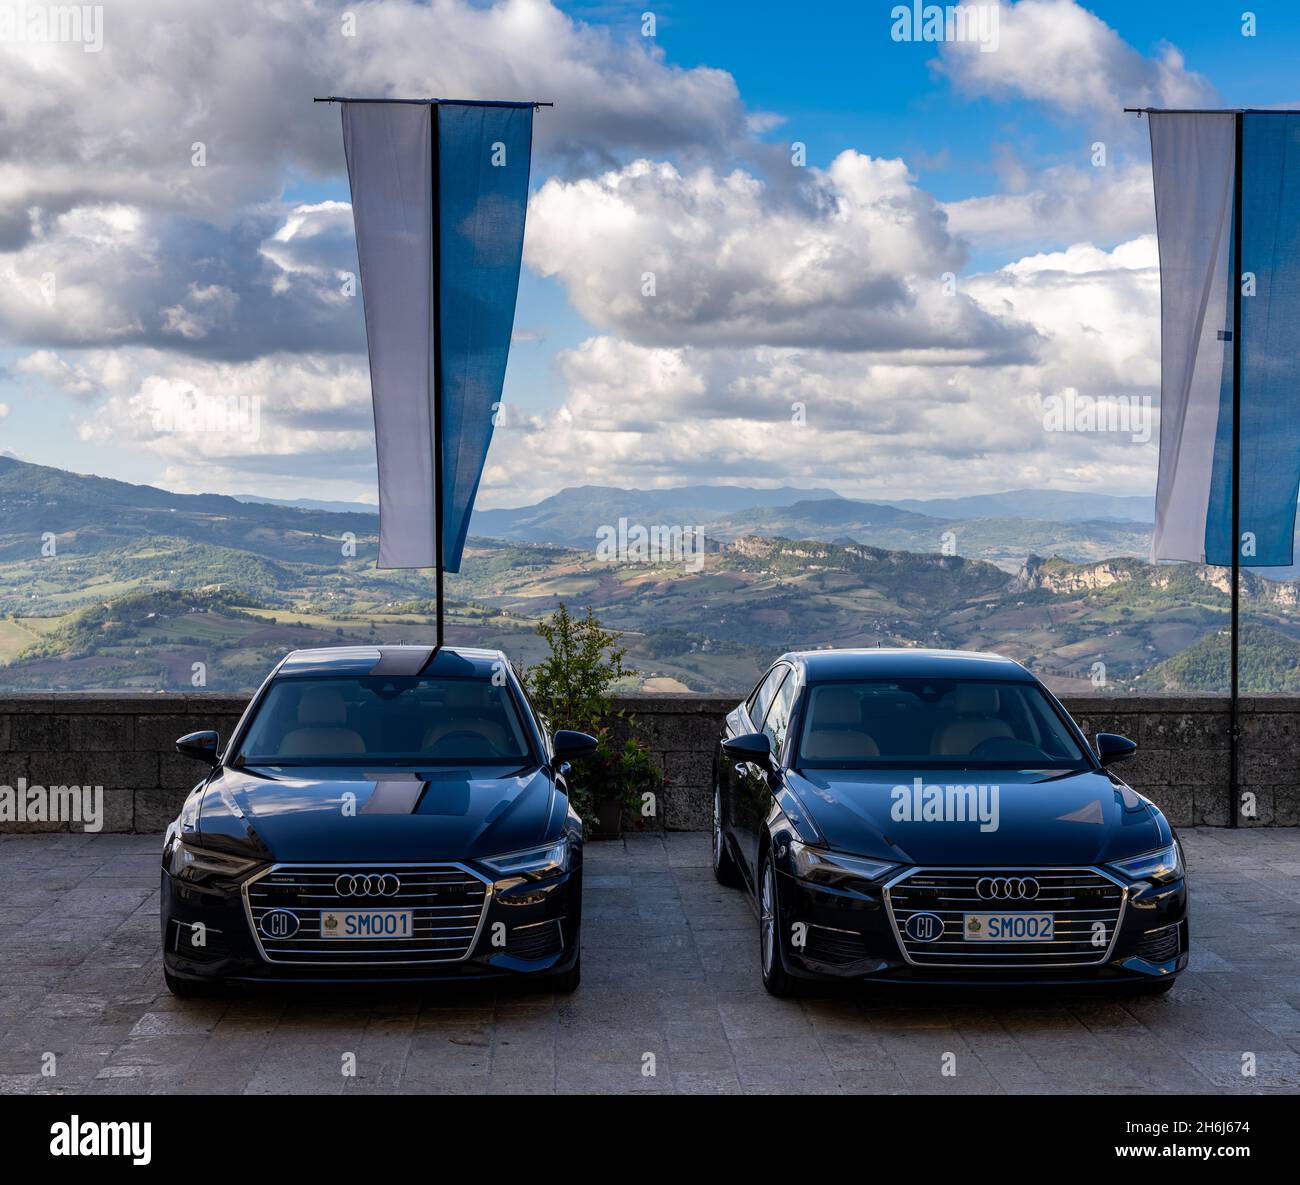 San Marino, San Marino - 14 October, 2021: view of the cars of the two captain regents of the Republic of San Marino parked outside the governmental p Stock Photo